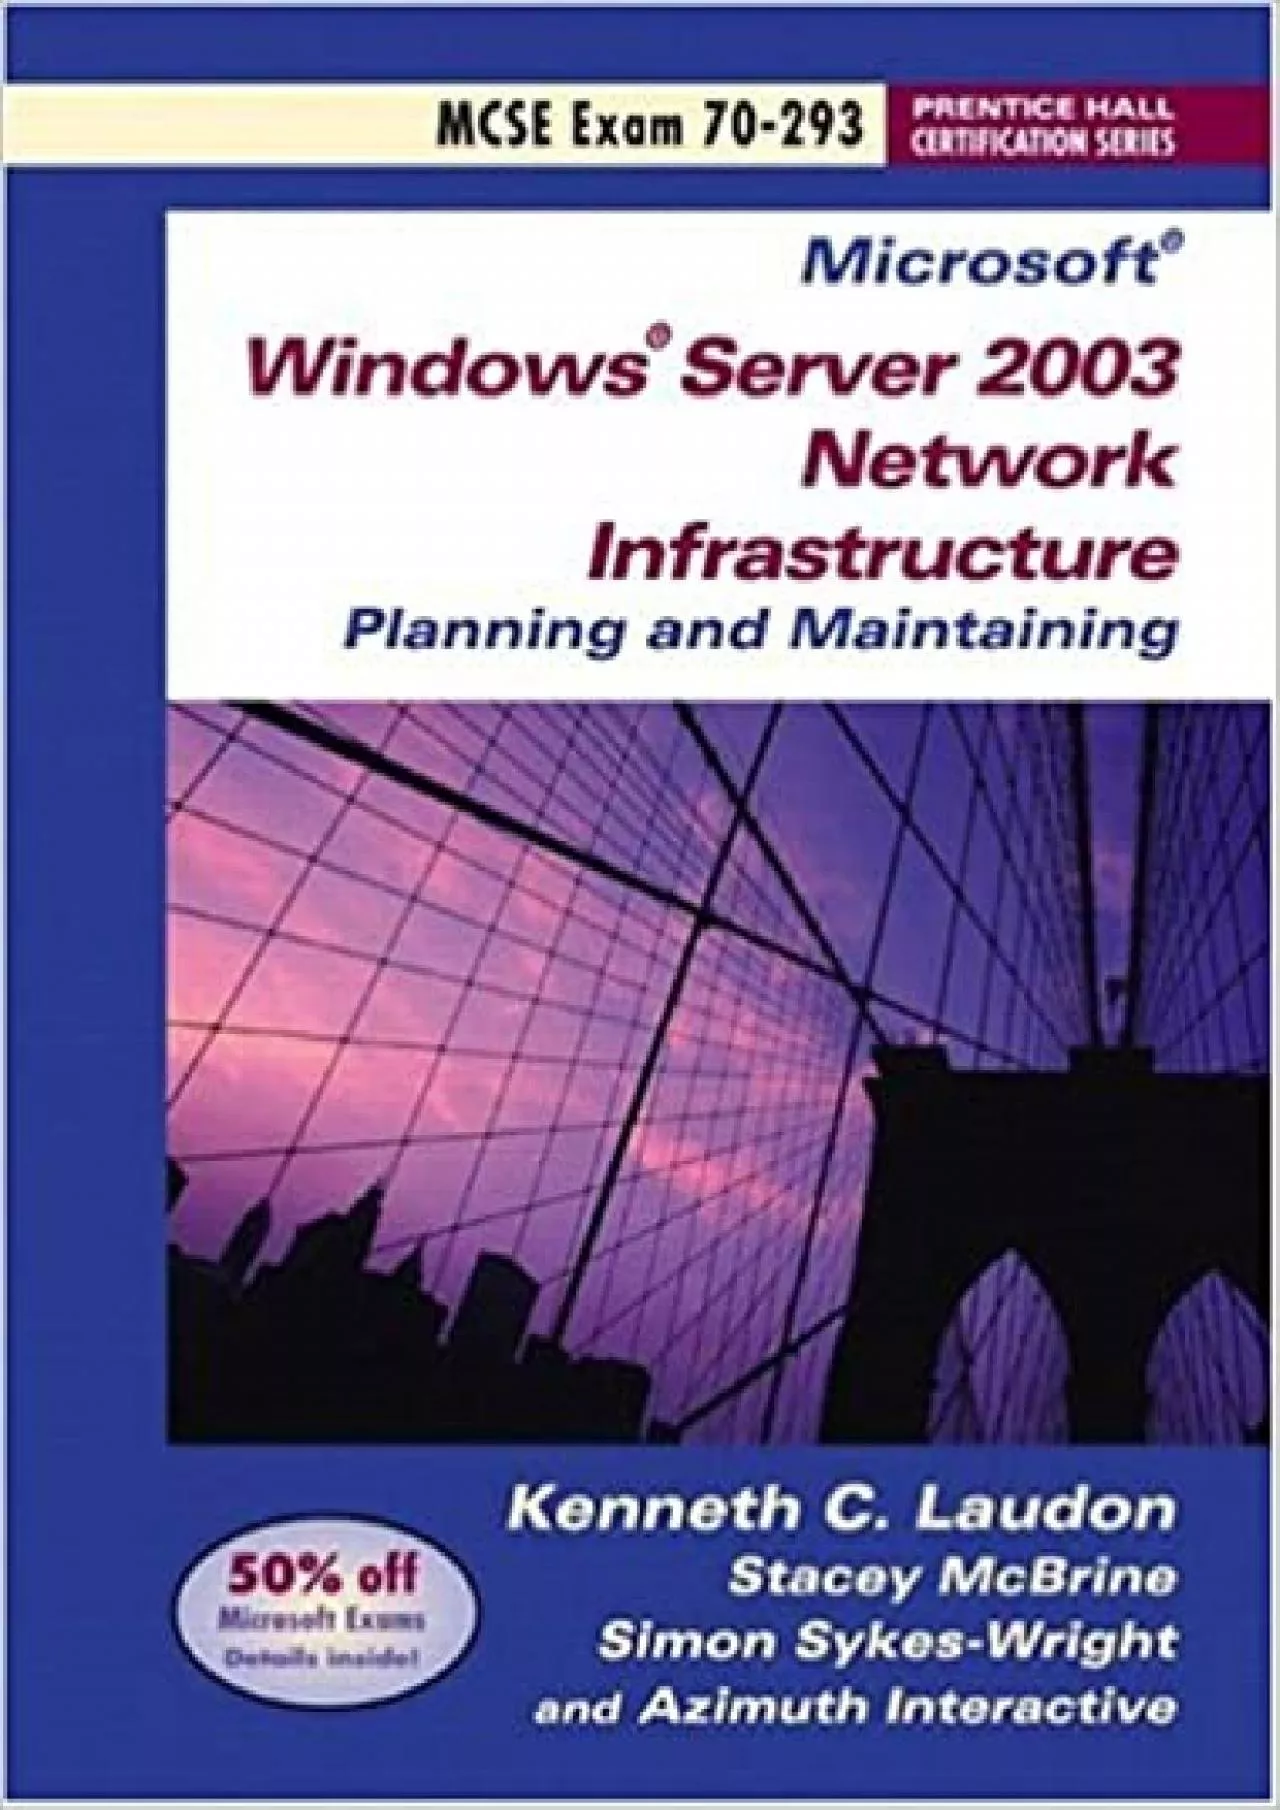 Implementing Managing and Maintaining a Microsoft Windows Server 2003 Network Infrastructure